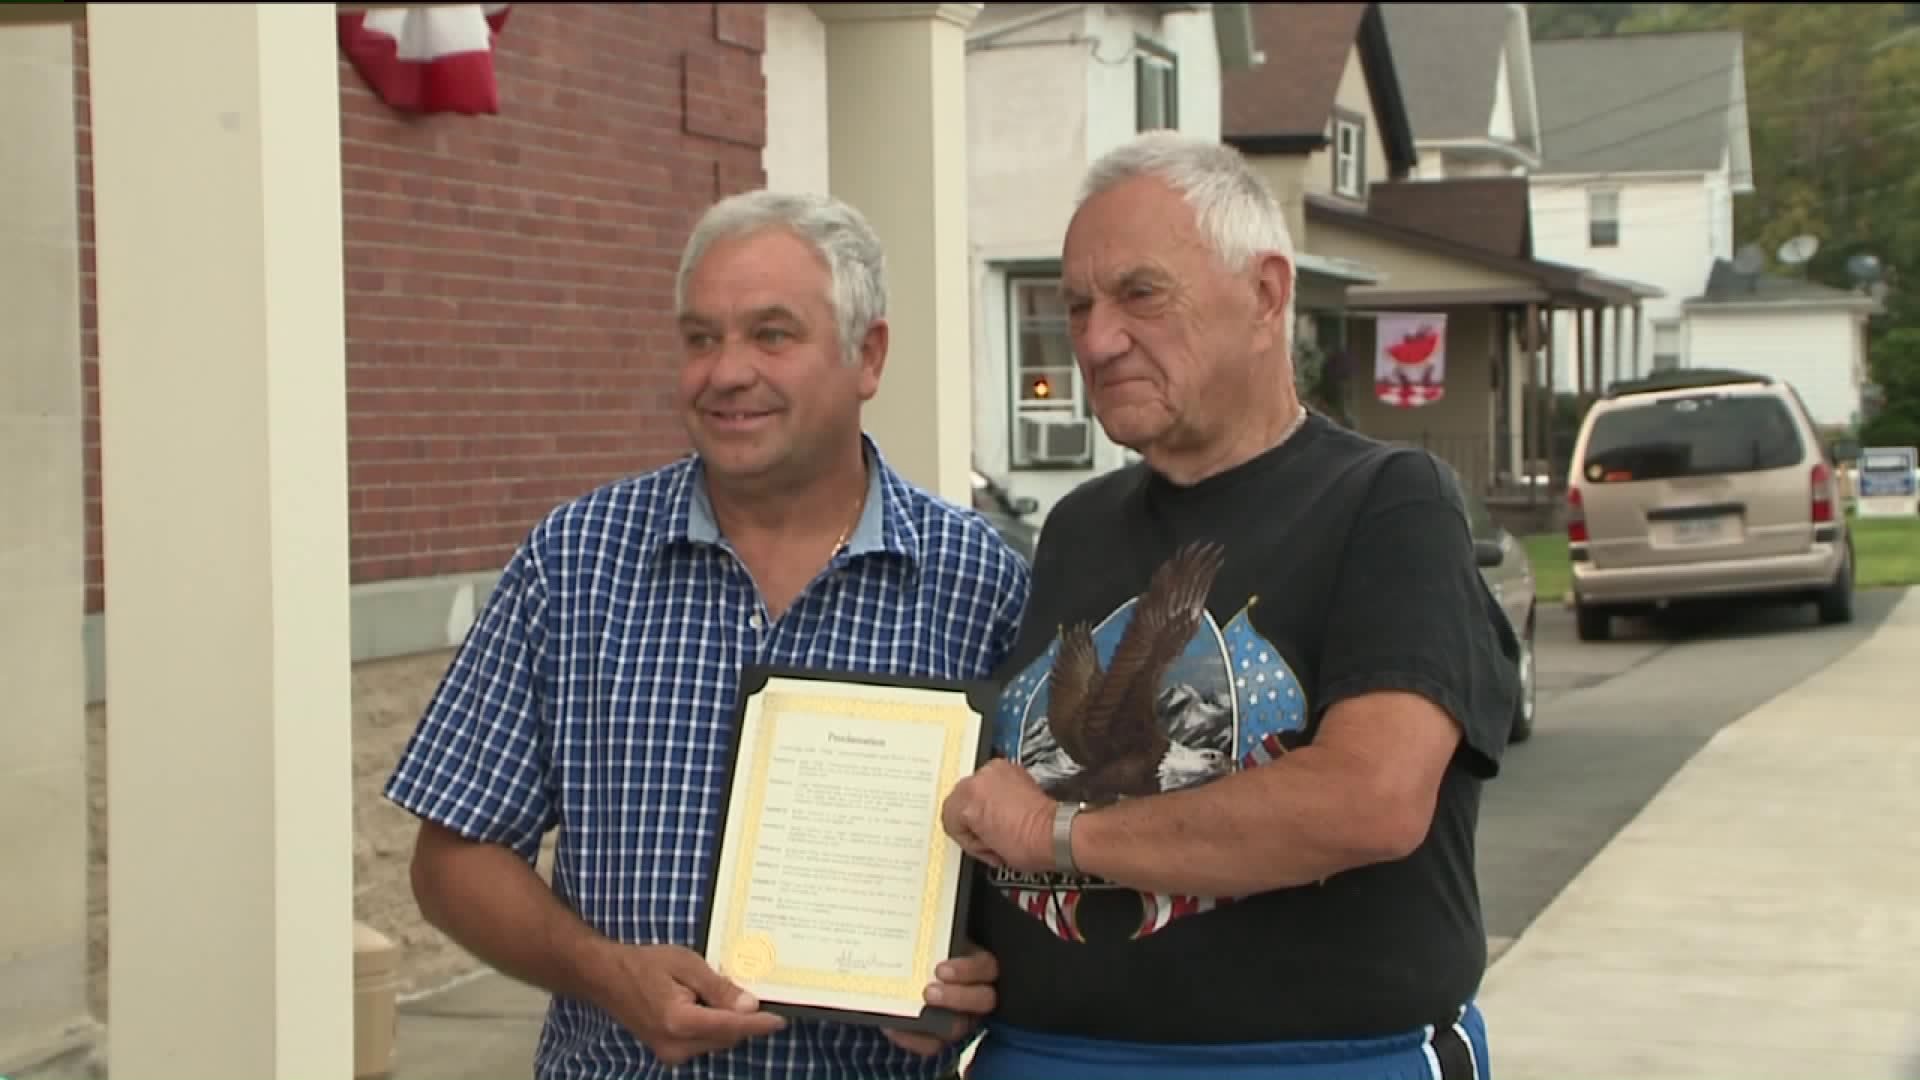 Archbald City Council Presents Volunteer Awards to Two Men